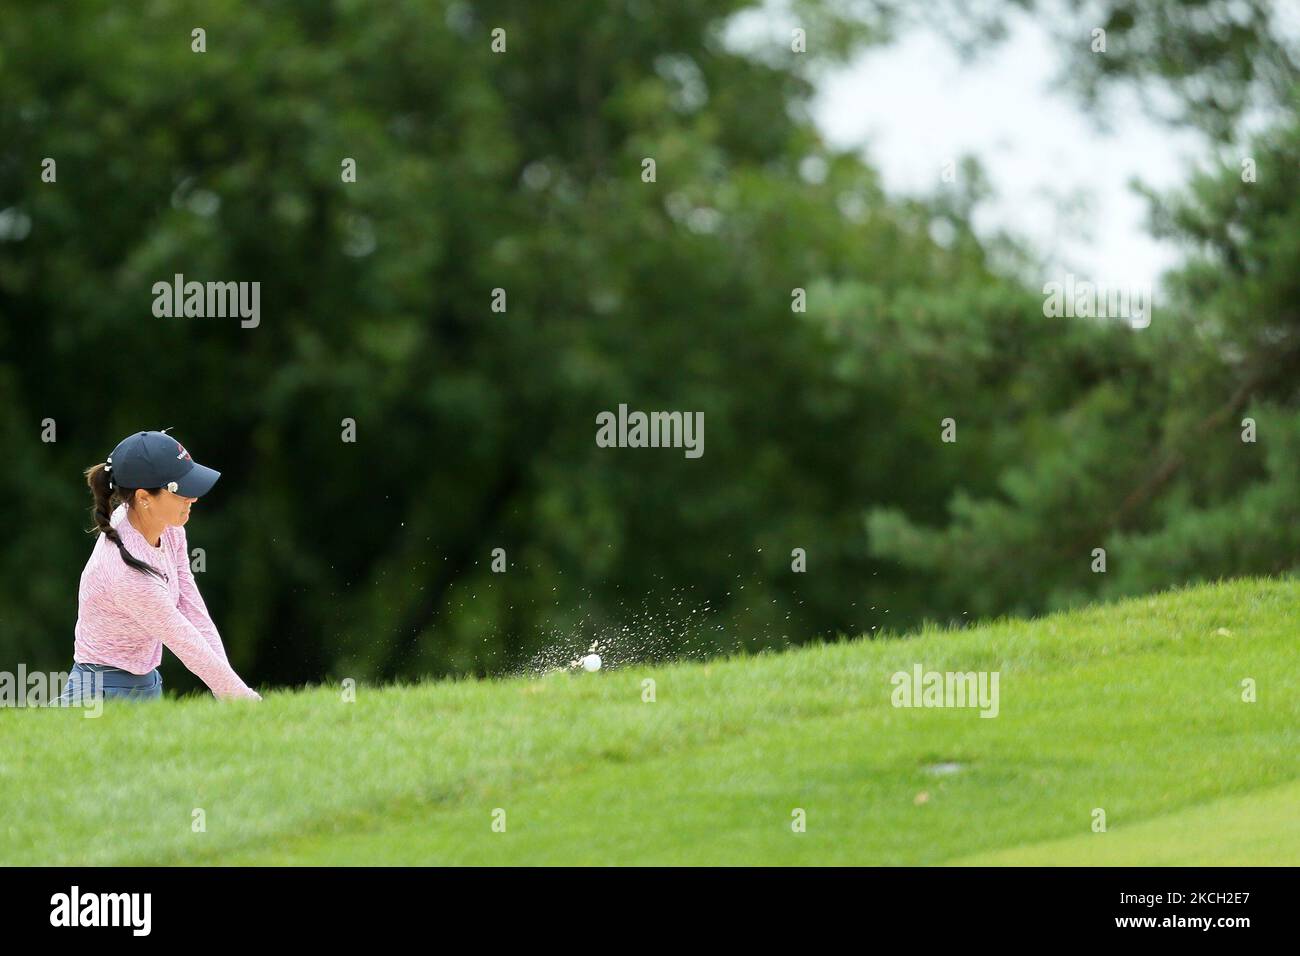 Jaye Marie Green hits out of the bunker toward the first green during the second round of the Marathon LPGA Classic presented by Dana golf tournament at Highland Meadows Golf Club in Sylvania, Ohio USA, on Friday, July 9, 2021. (Photo by Jorge Lemus/NurPhoto) Stock Photo